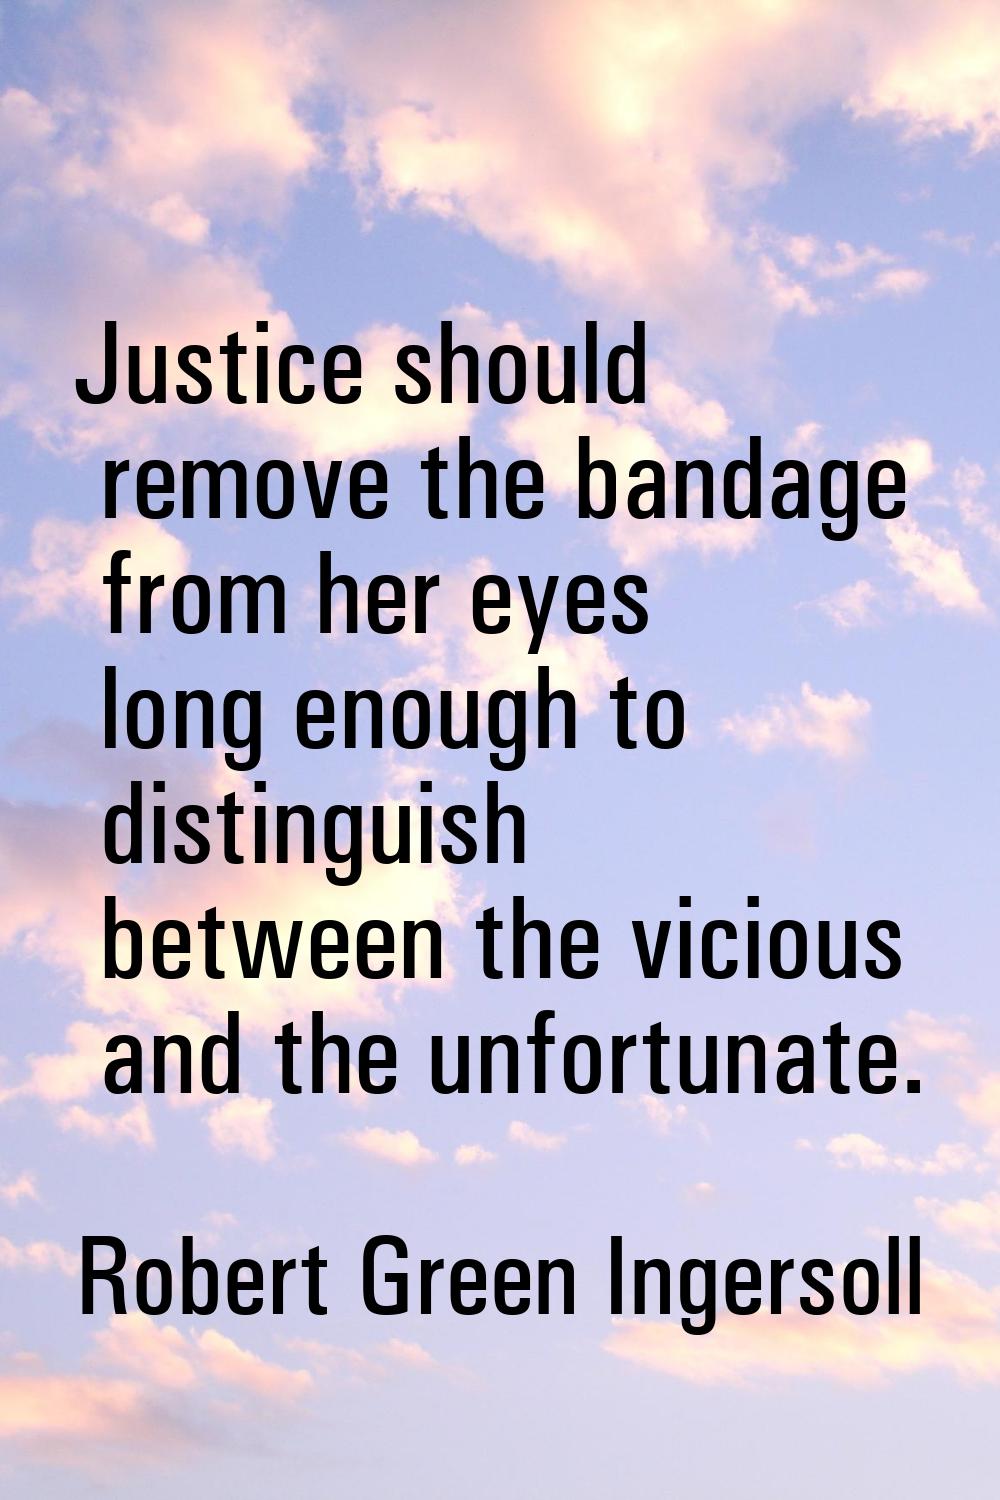 Justice should remove the bandage from her eyes long enough to distinguish between the vicious and 